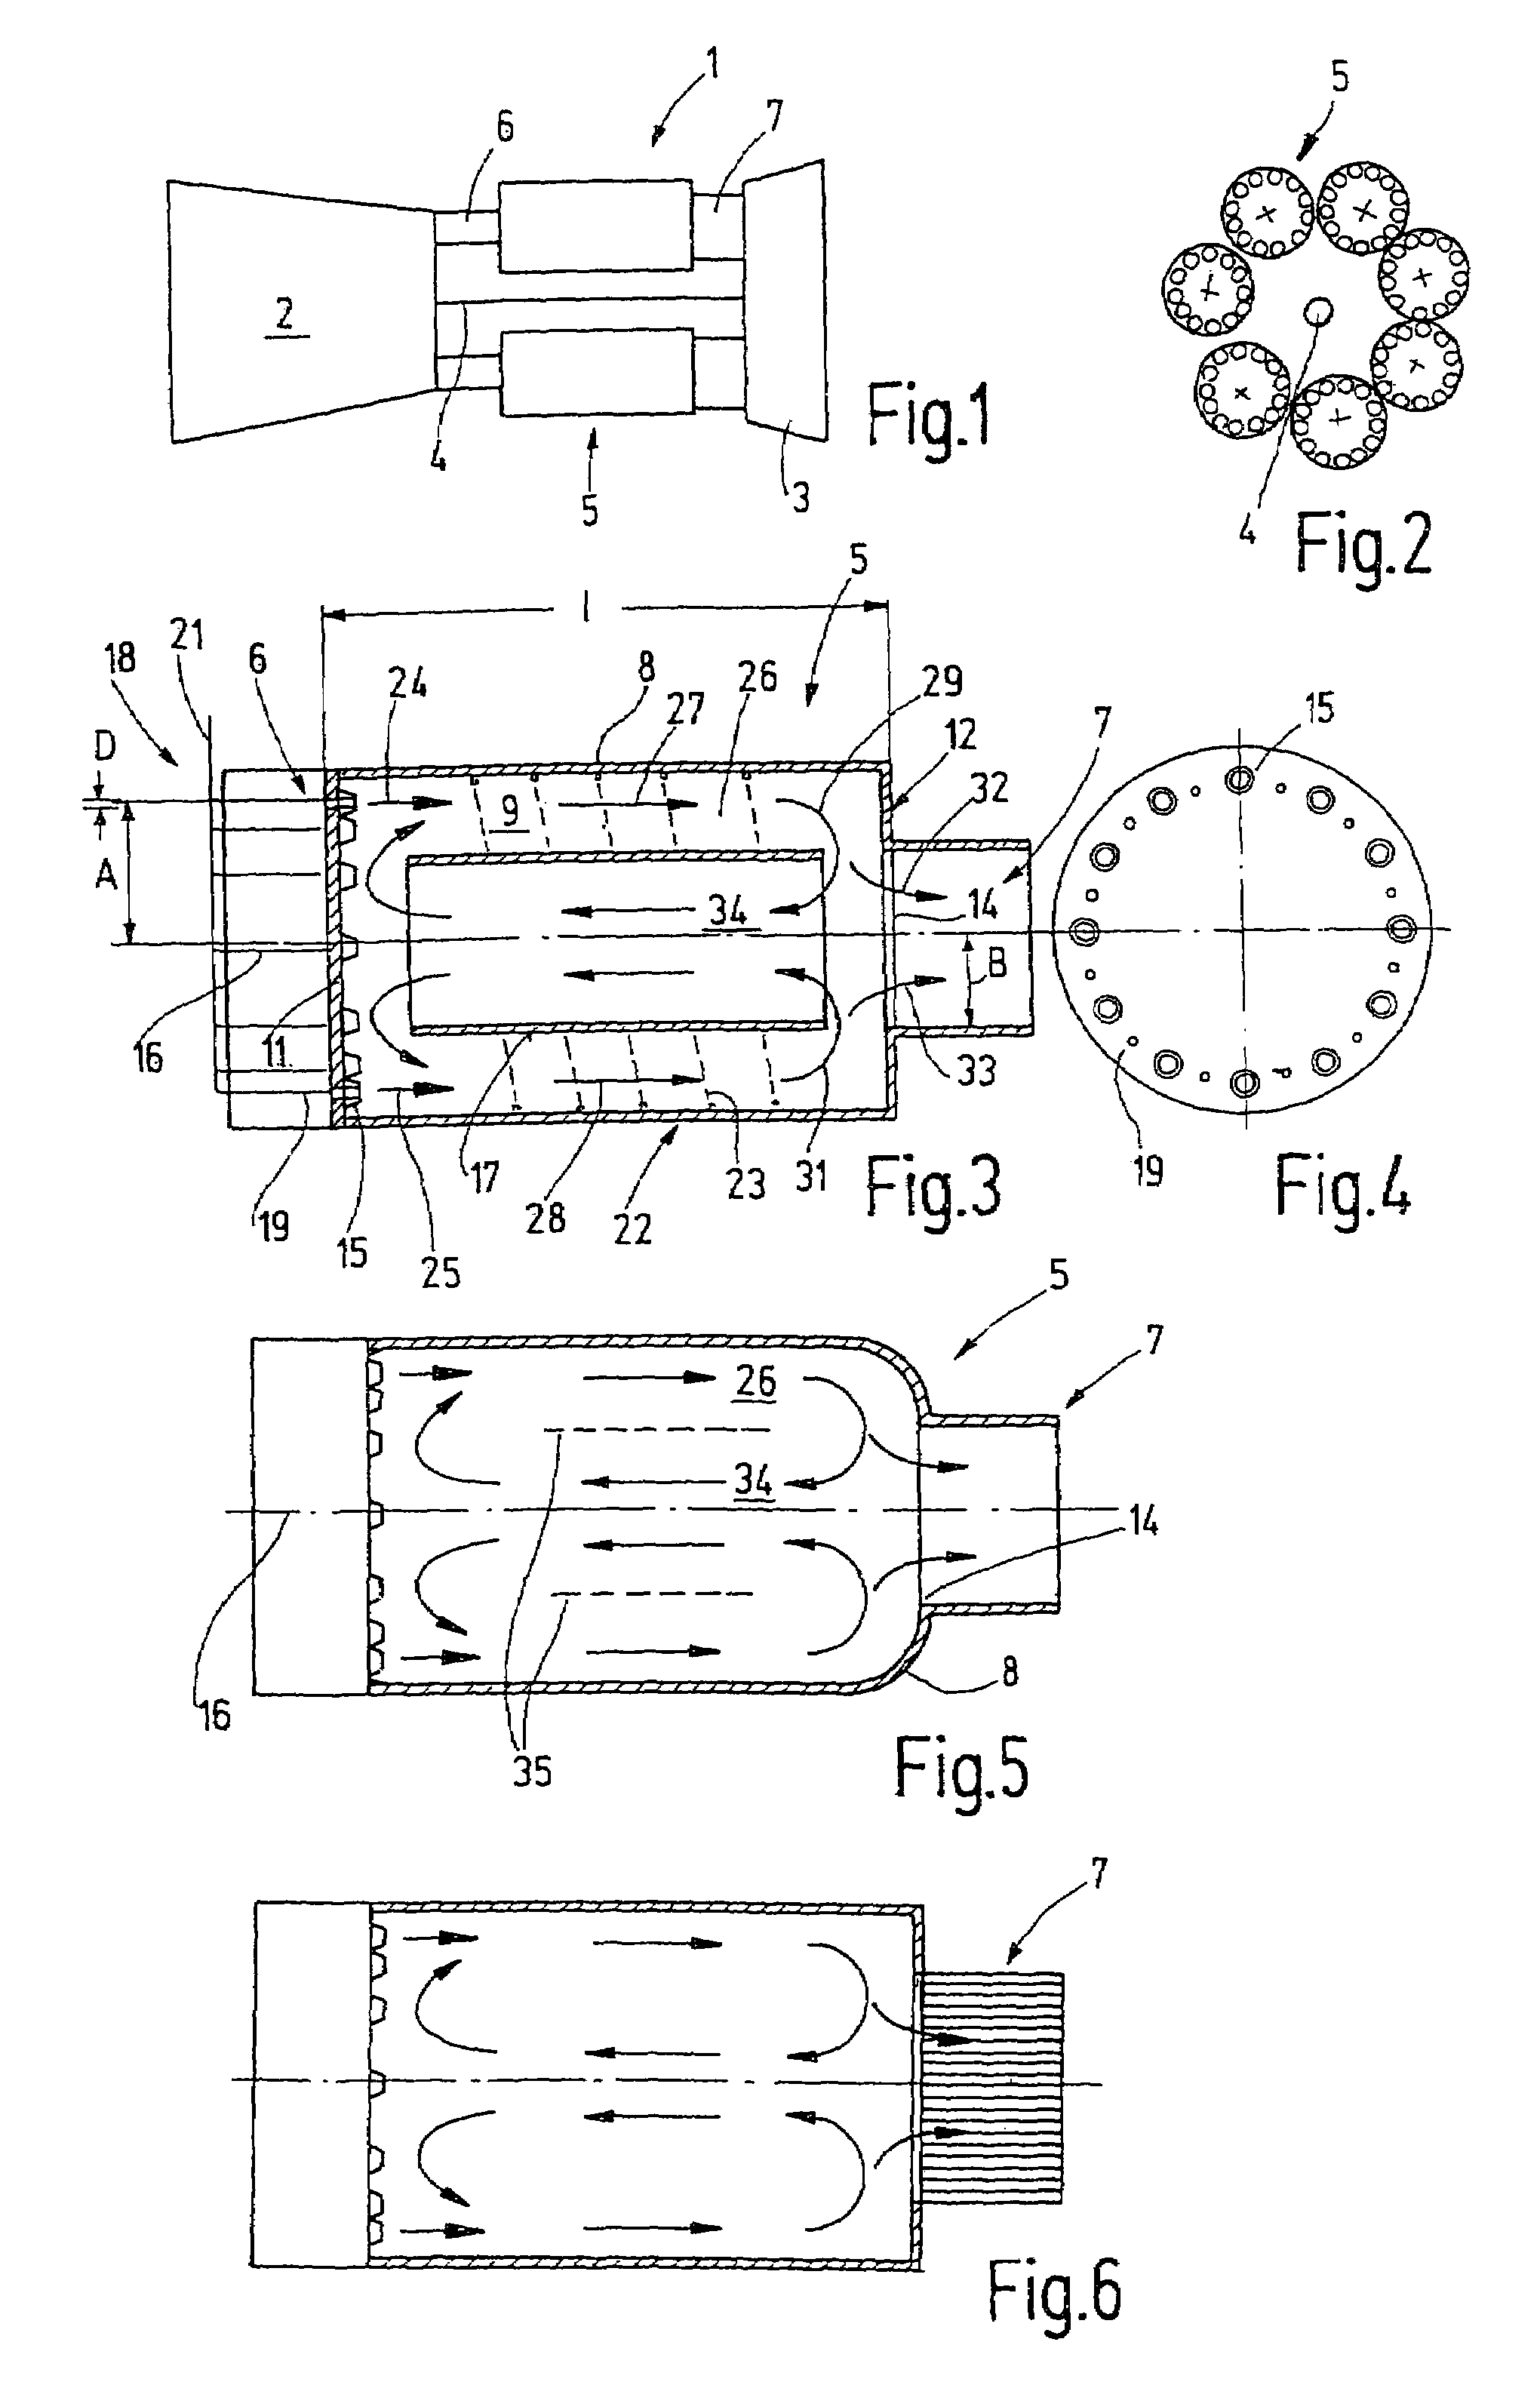 Combustion chamber with flameless oxidation